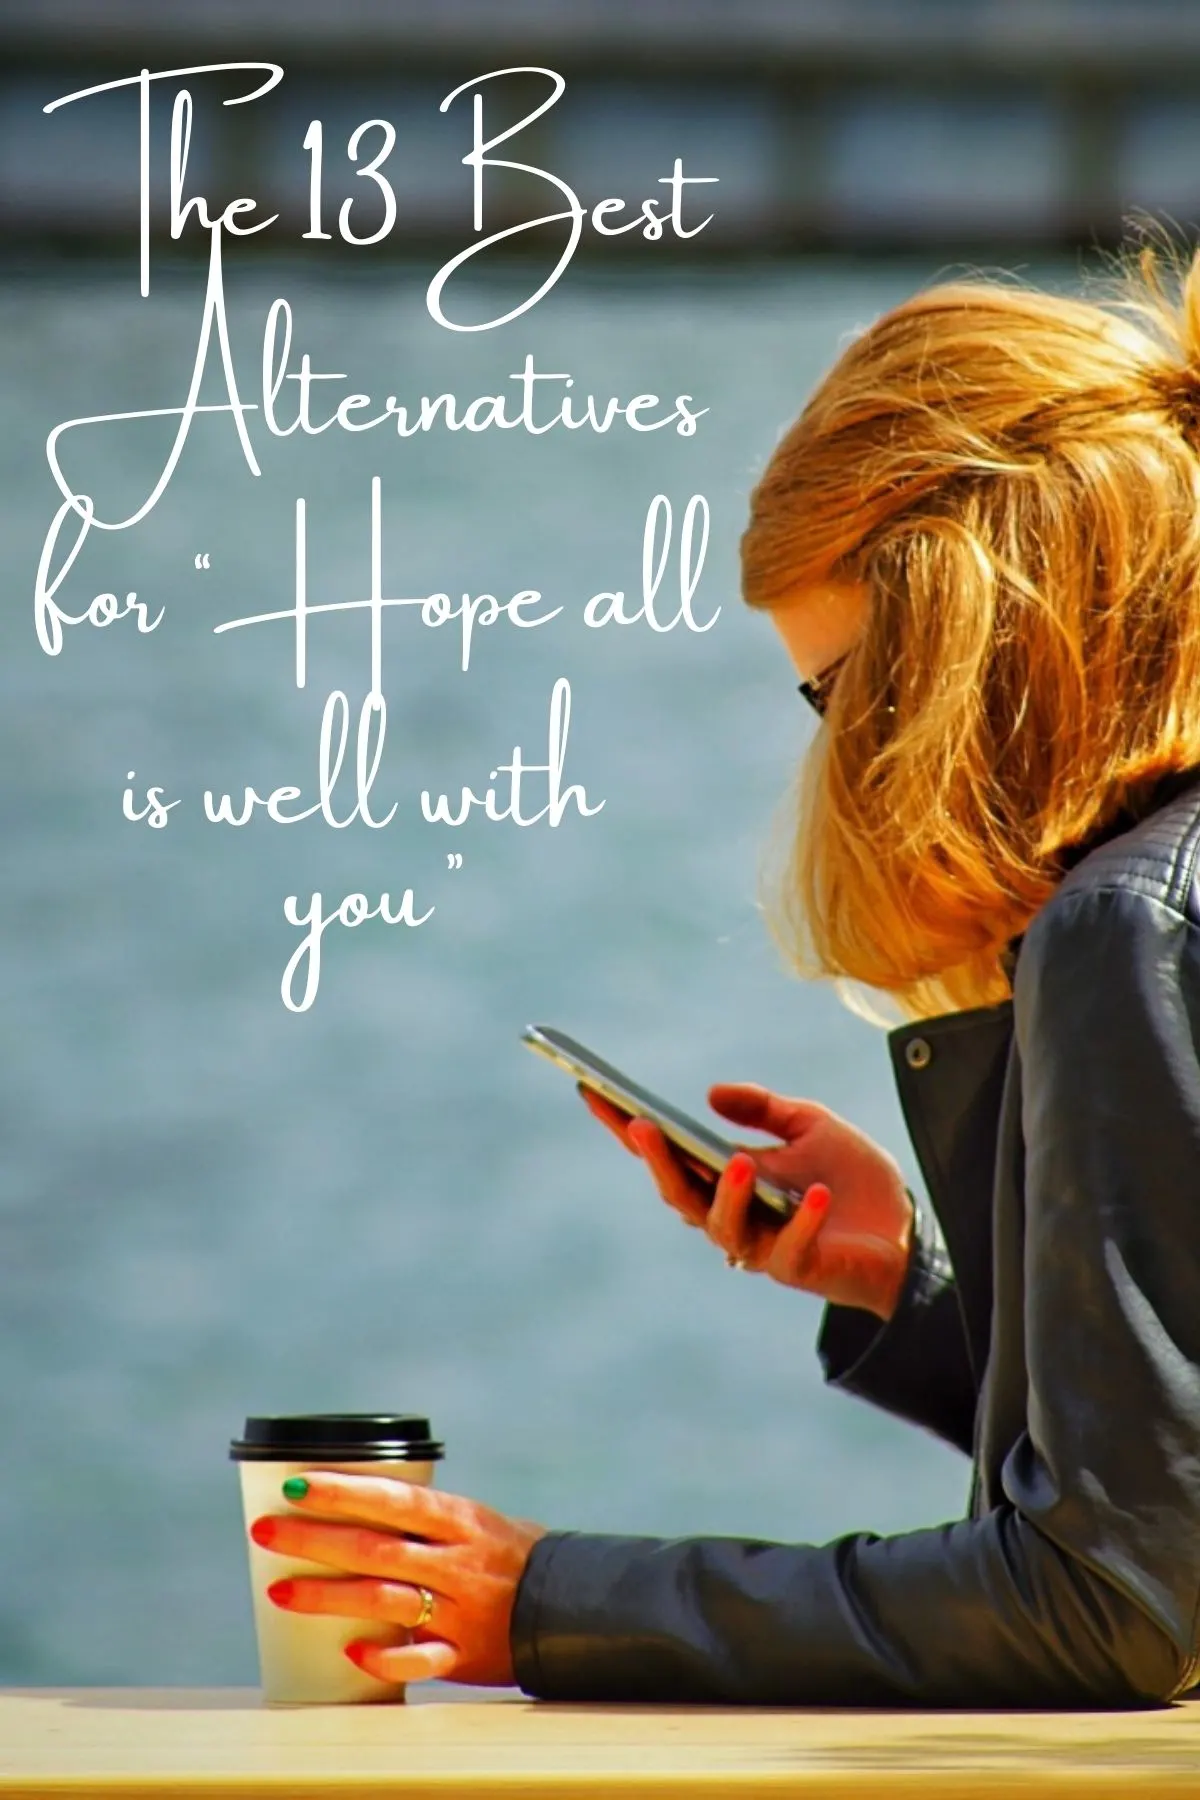 The 13 Best Alternatives for “Hope all is well with you”